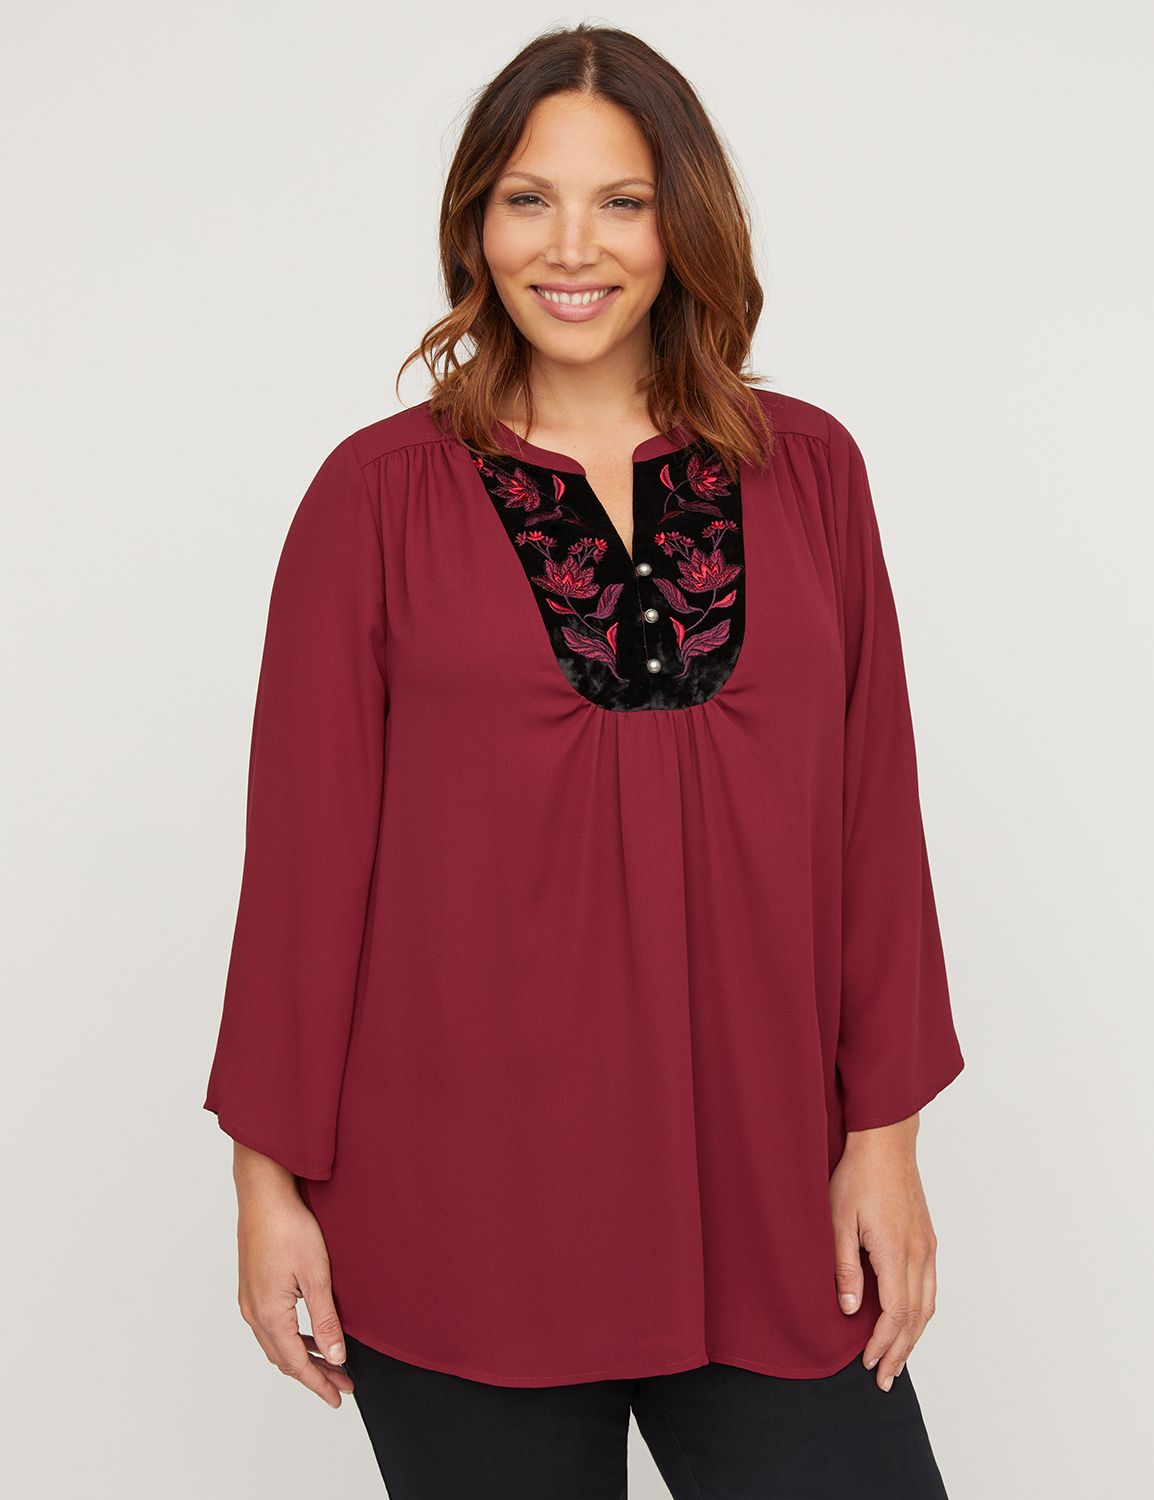 Women's Plus Size Blouses & Dressy Tops | Catherines